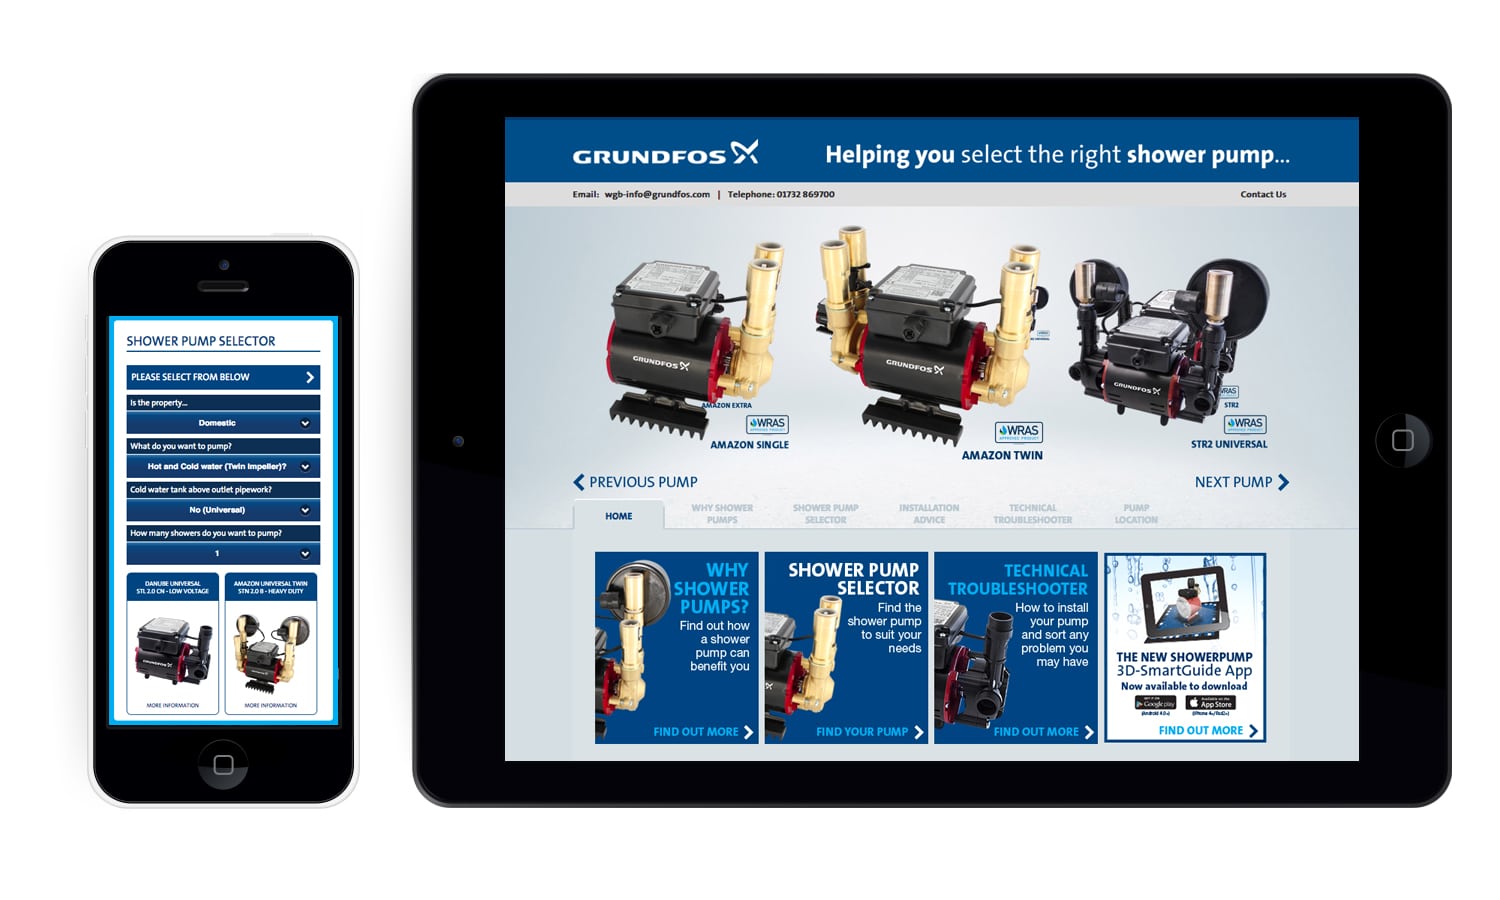 Grundfos shower pump selector website tablet and phone layout